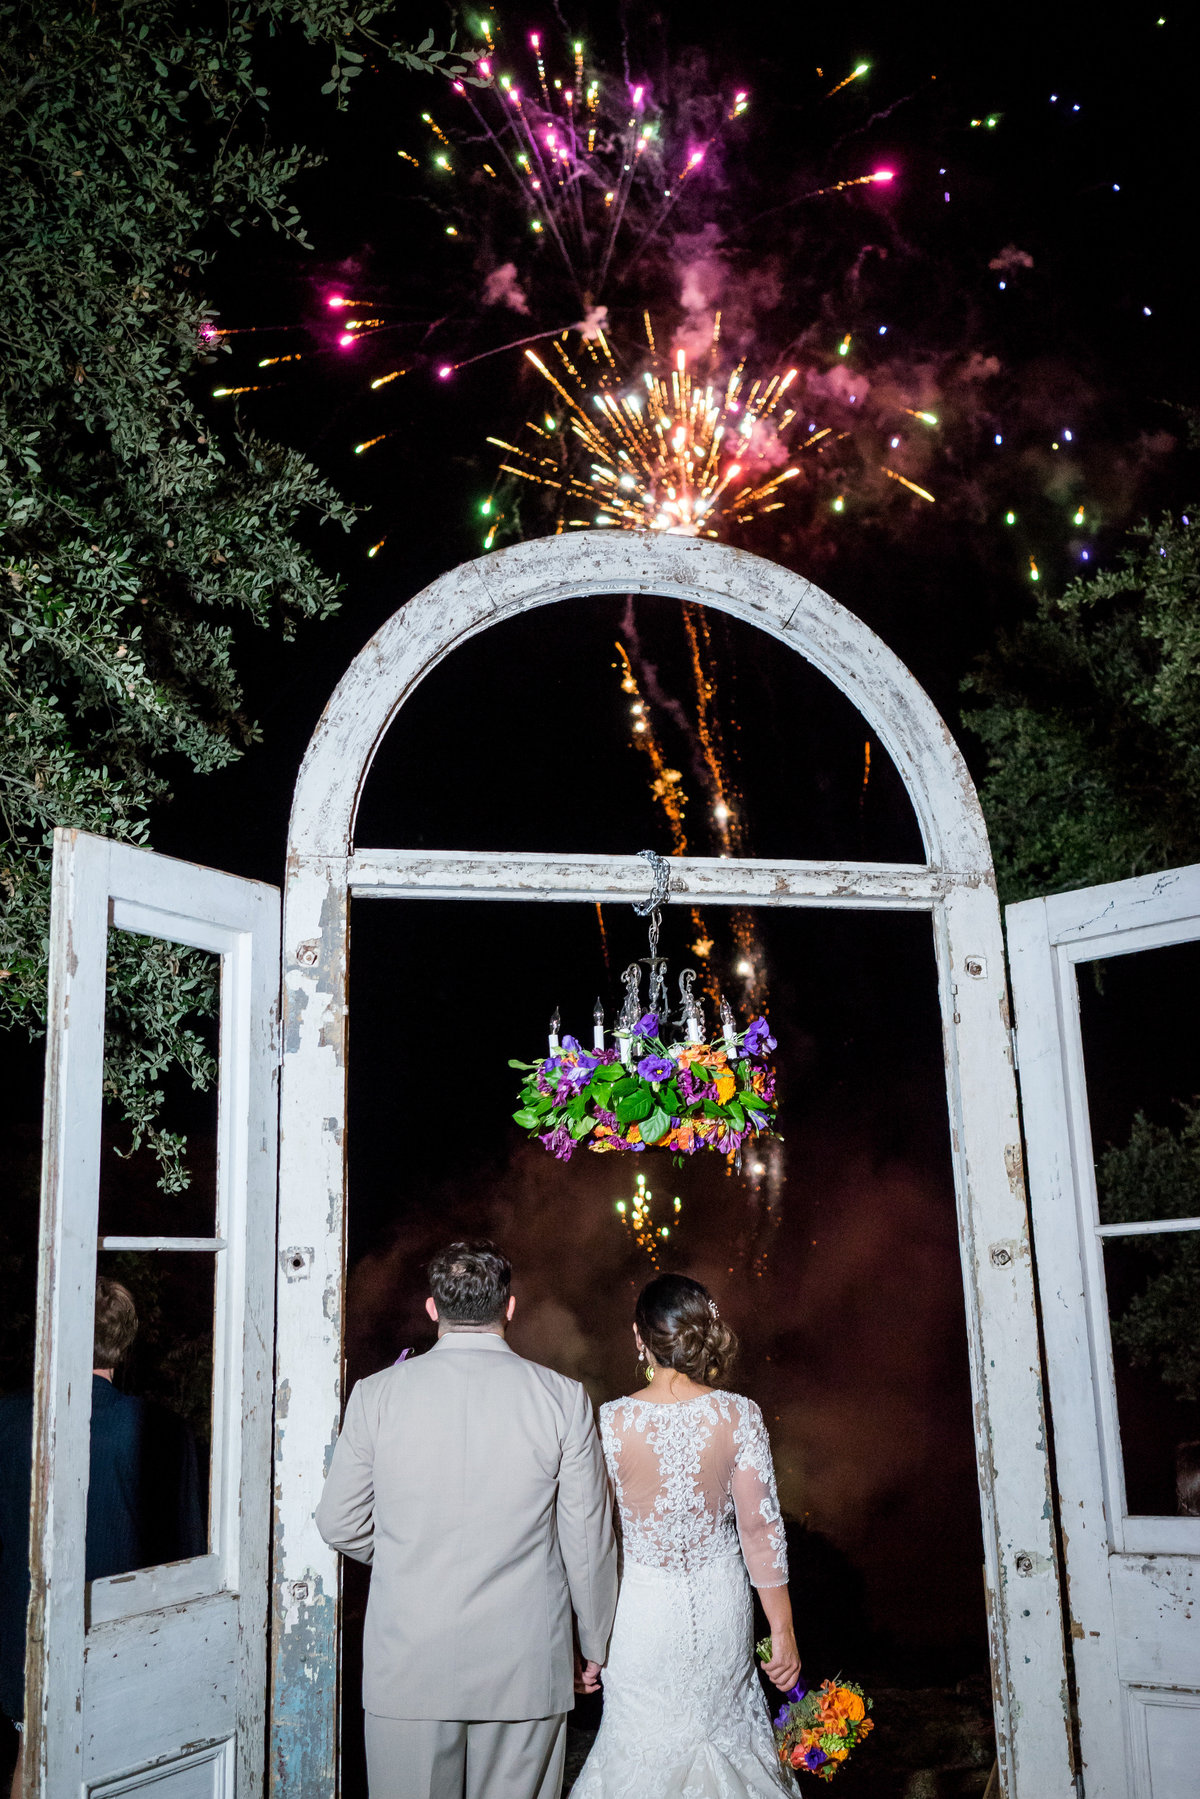 Bride and groom watch fireworks from outdoor altar wedding ceremony site for grand exit at Marquardt Ranch venue hill country